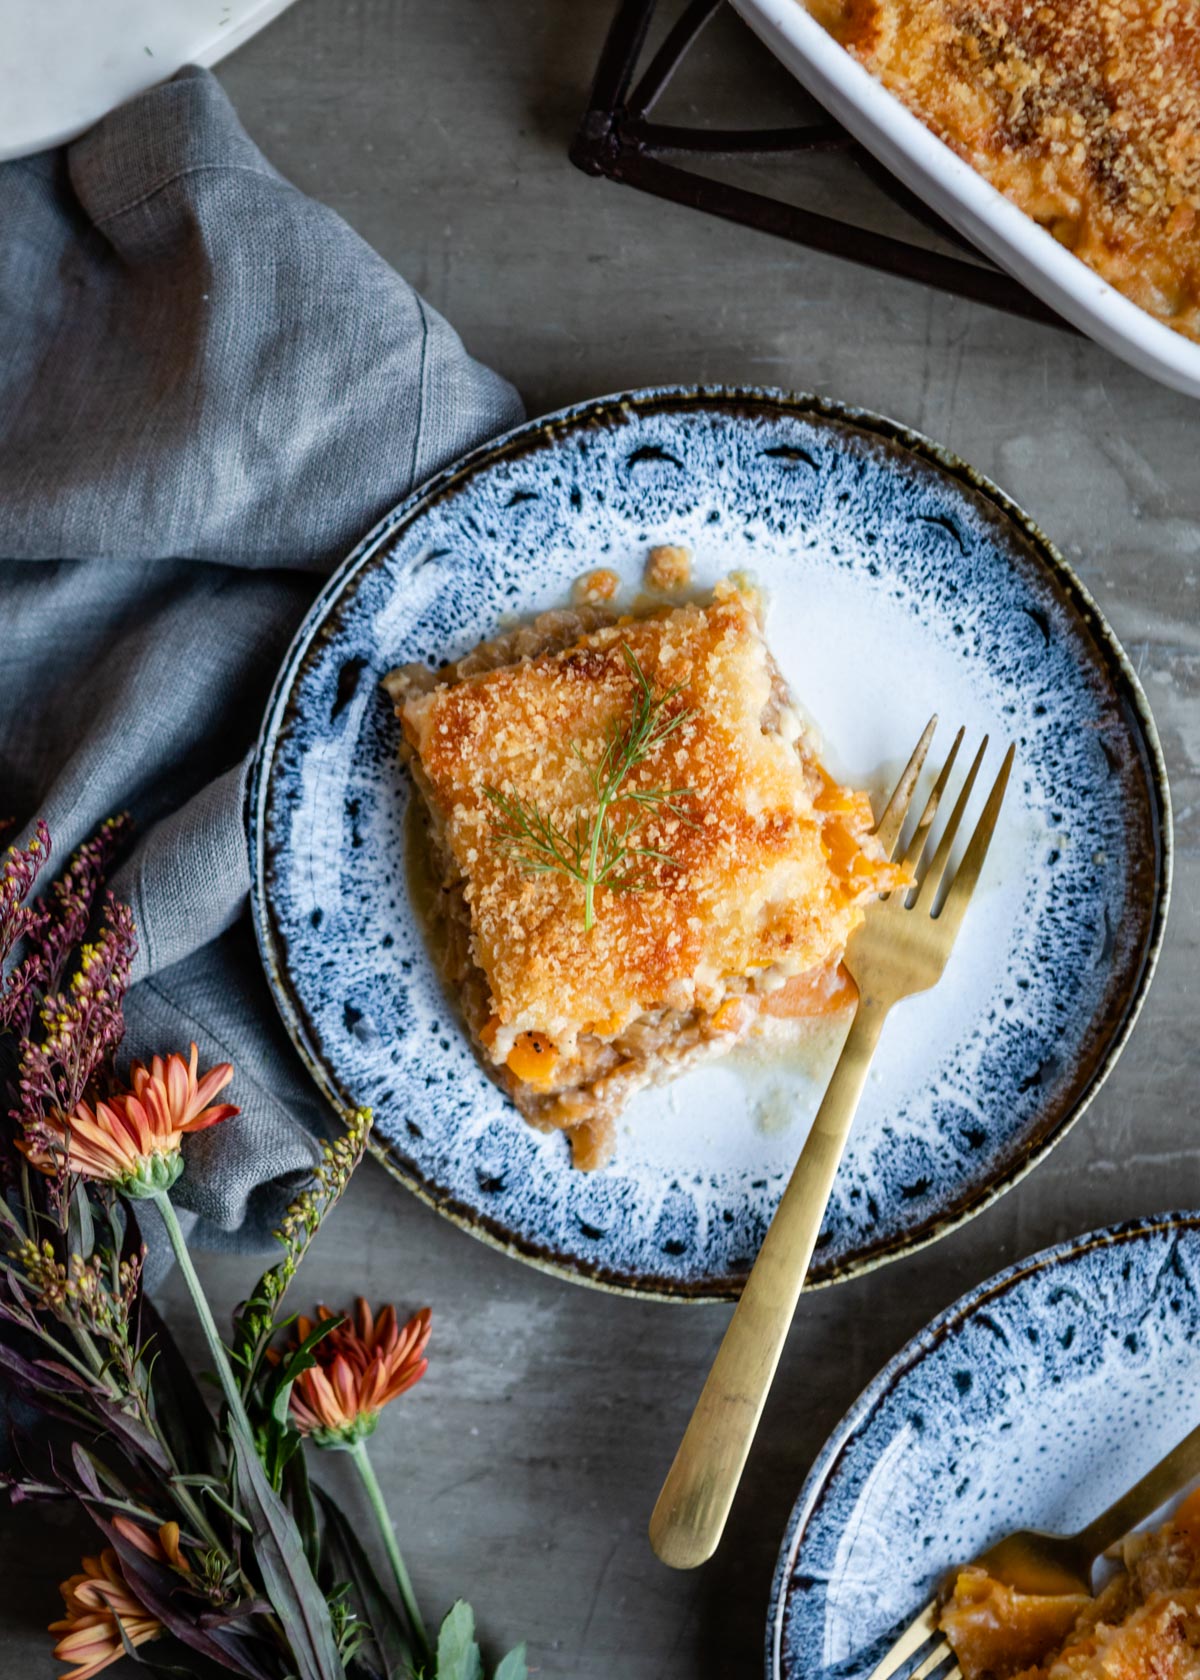 Butternut Squash Gratin with Caramelized Fennel and Gruyere